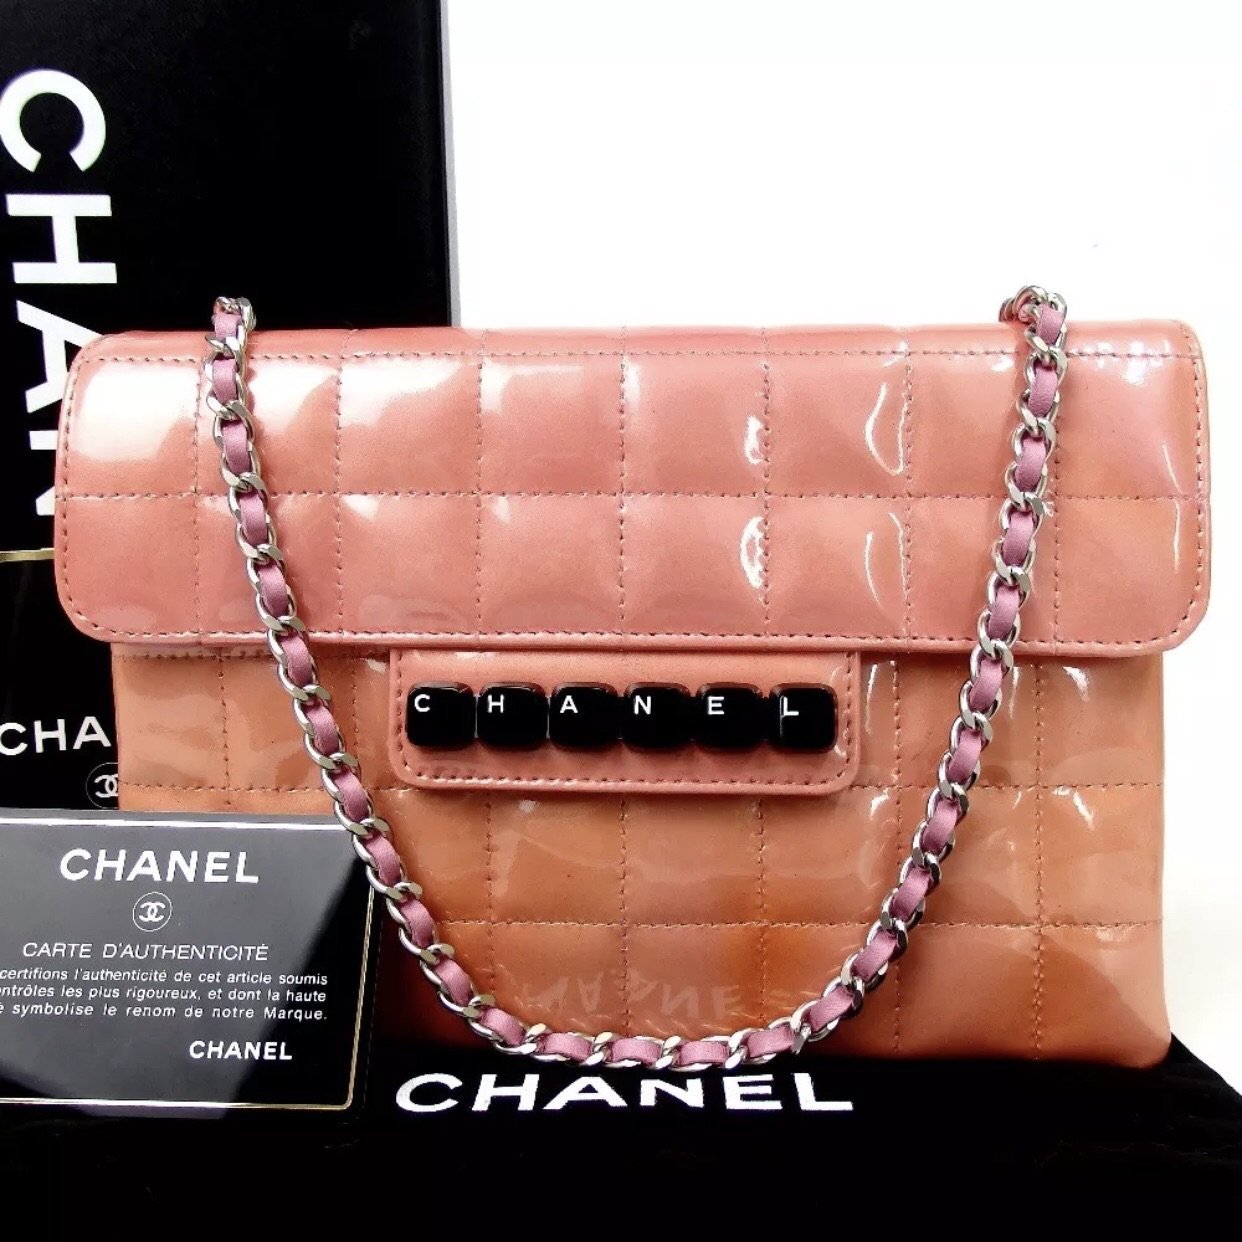 Chanel Quilted Chocolate Bar Shoulder Bag - authenticity Guaranteed